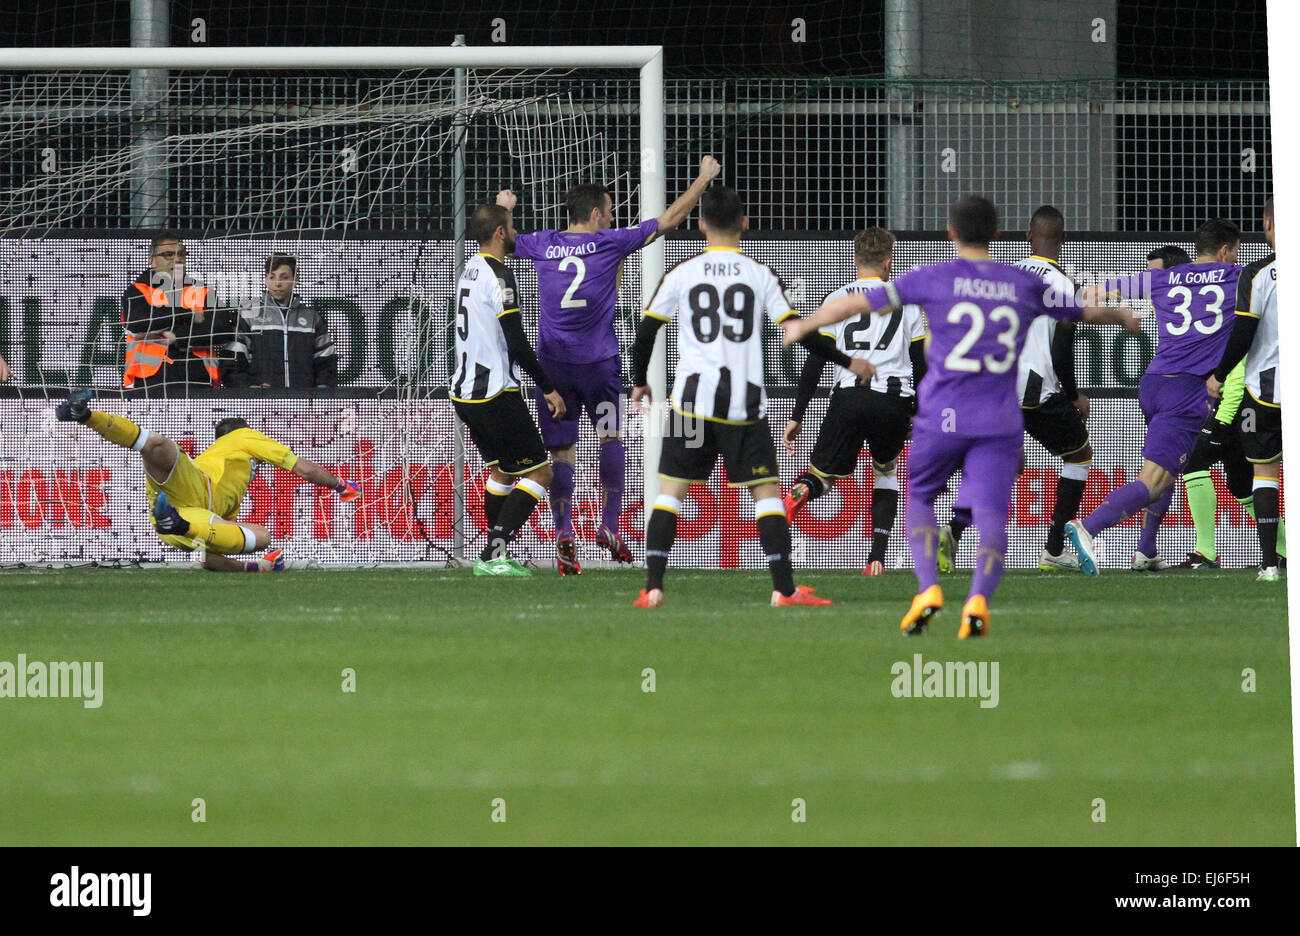 Udine, Italy. 22nd March, 2015. Fiorentina's forward Mario Garcia Gomez  scoring goal 1 - 1 during the Italian Serie A football match between Udinese  and Fiorentina on Sunday 22 March 2015 at